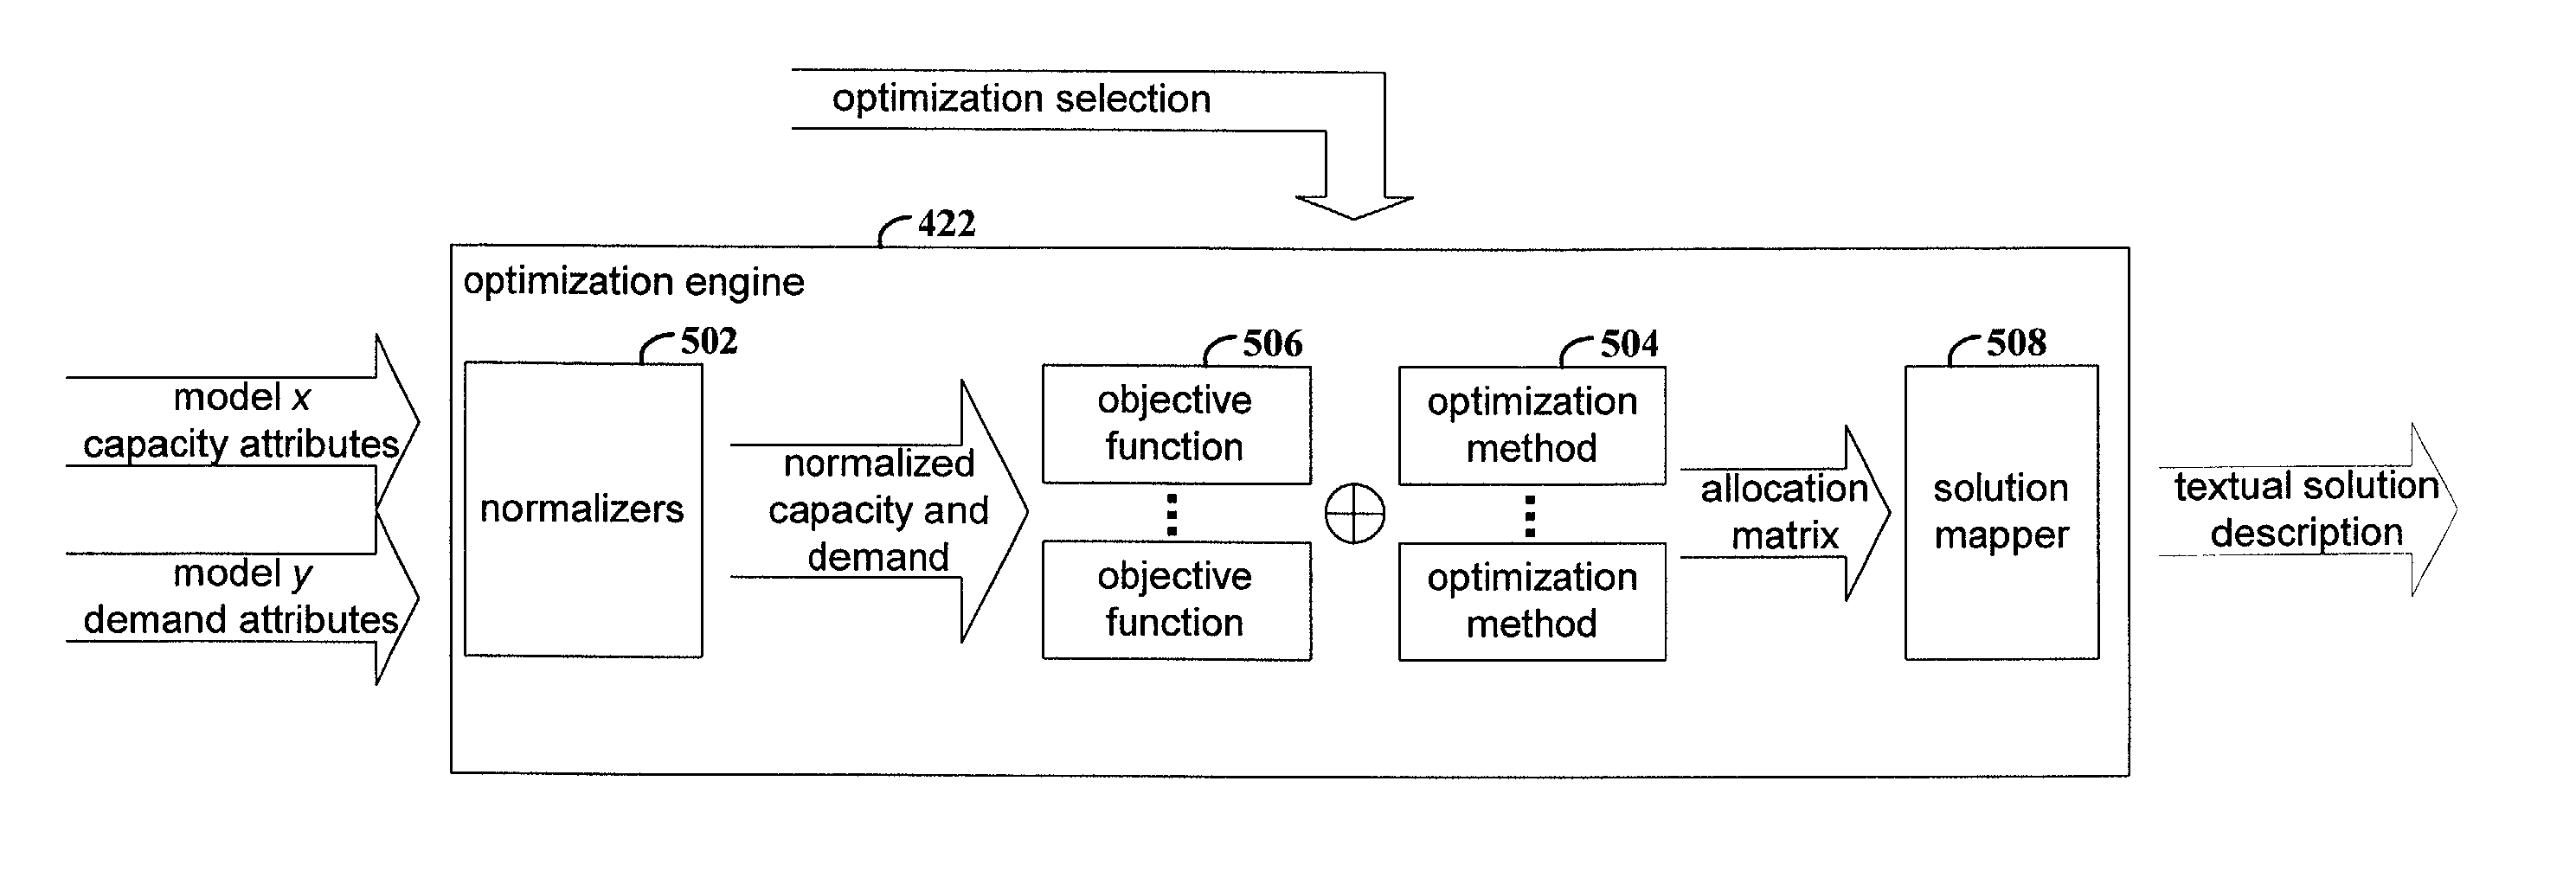 Tailorable optimization using model descriptions of services and servers in a computing environment